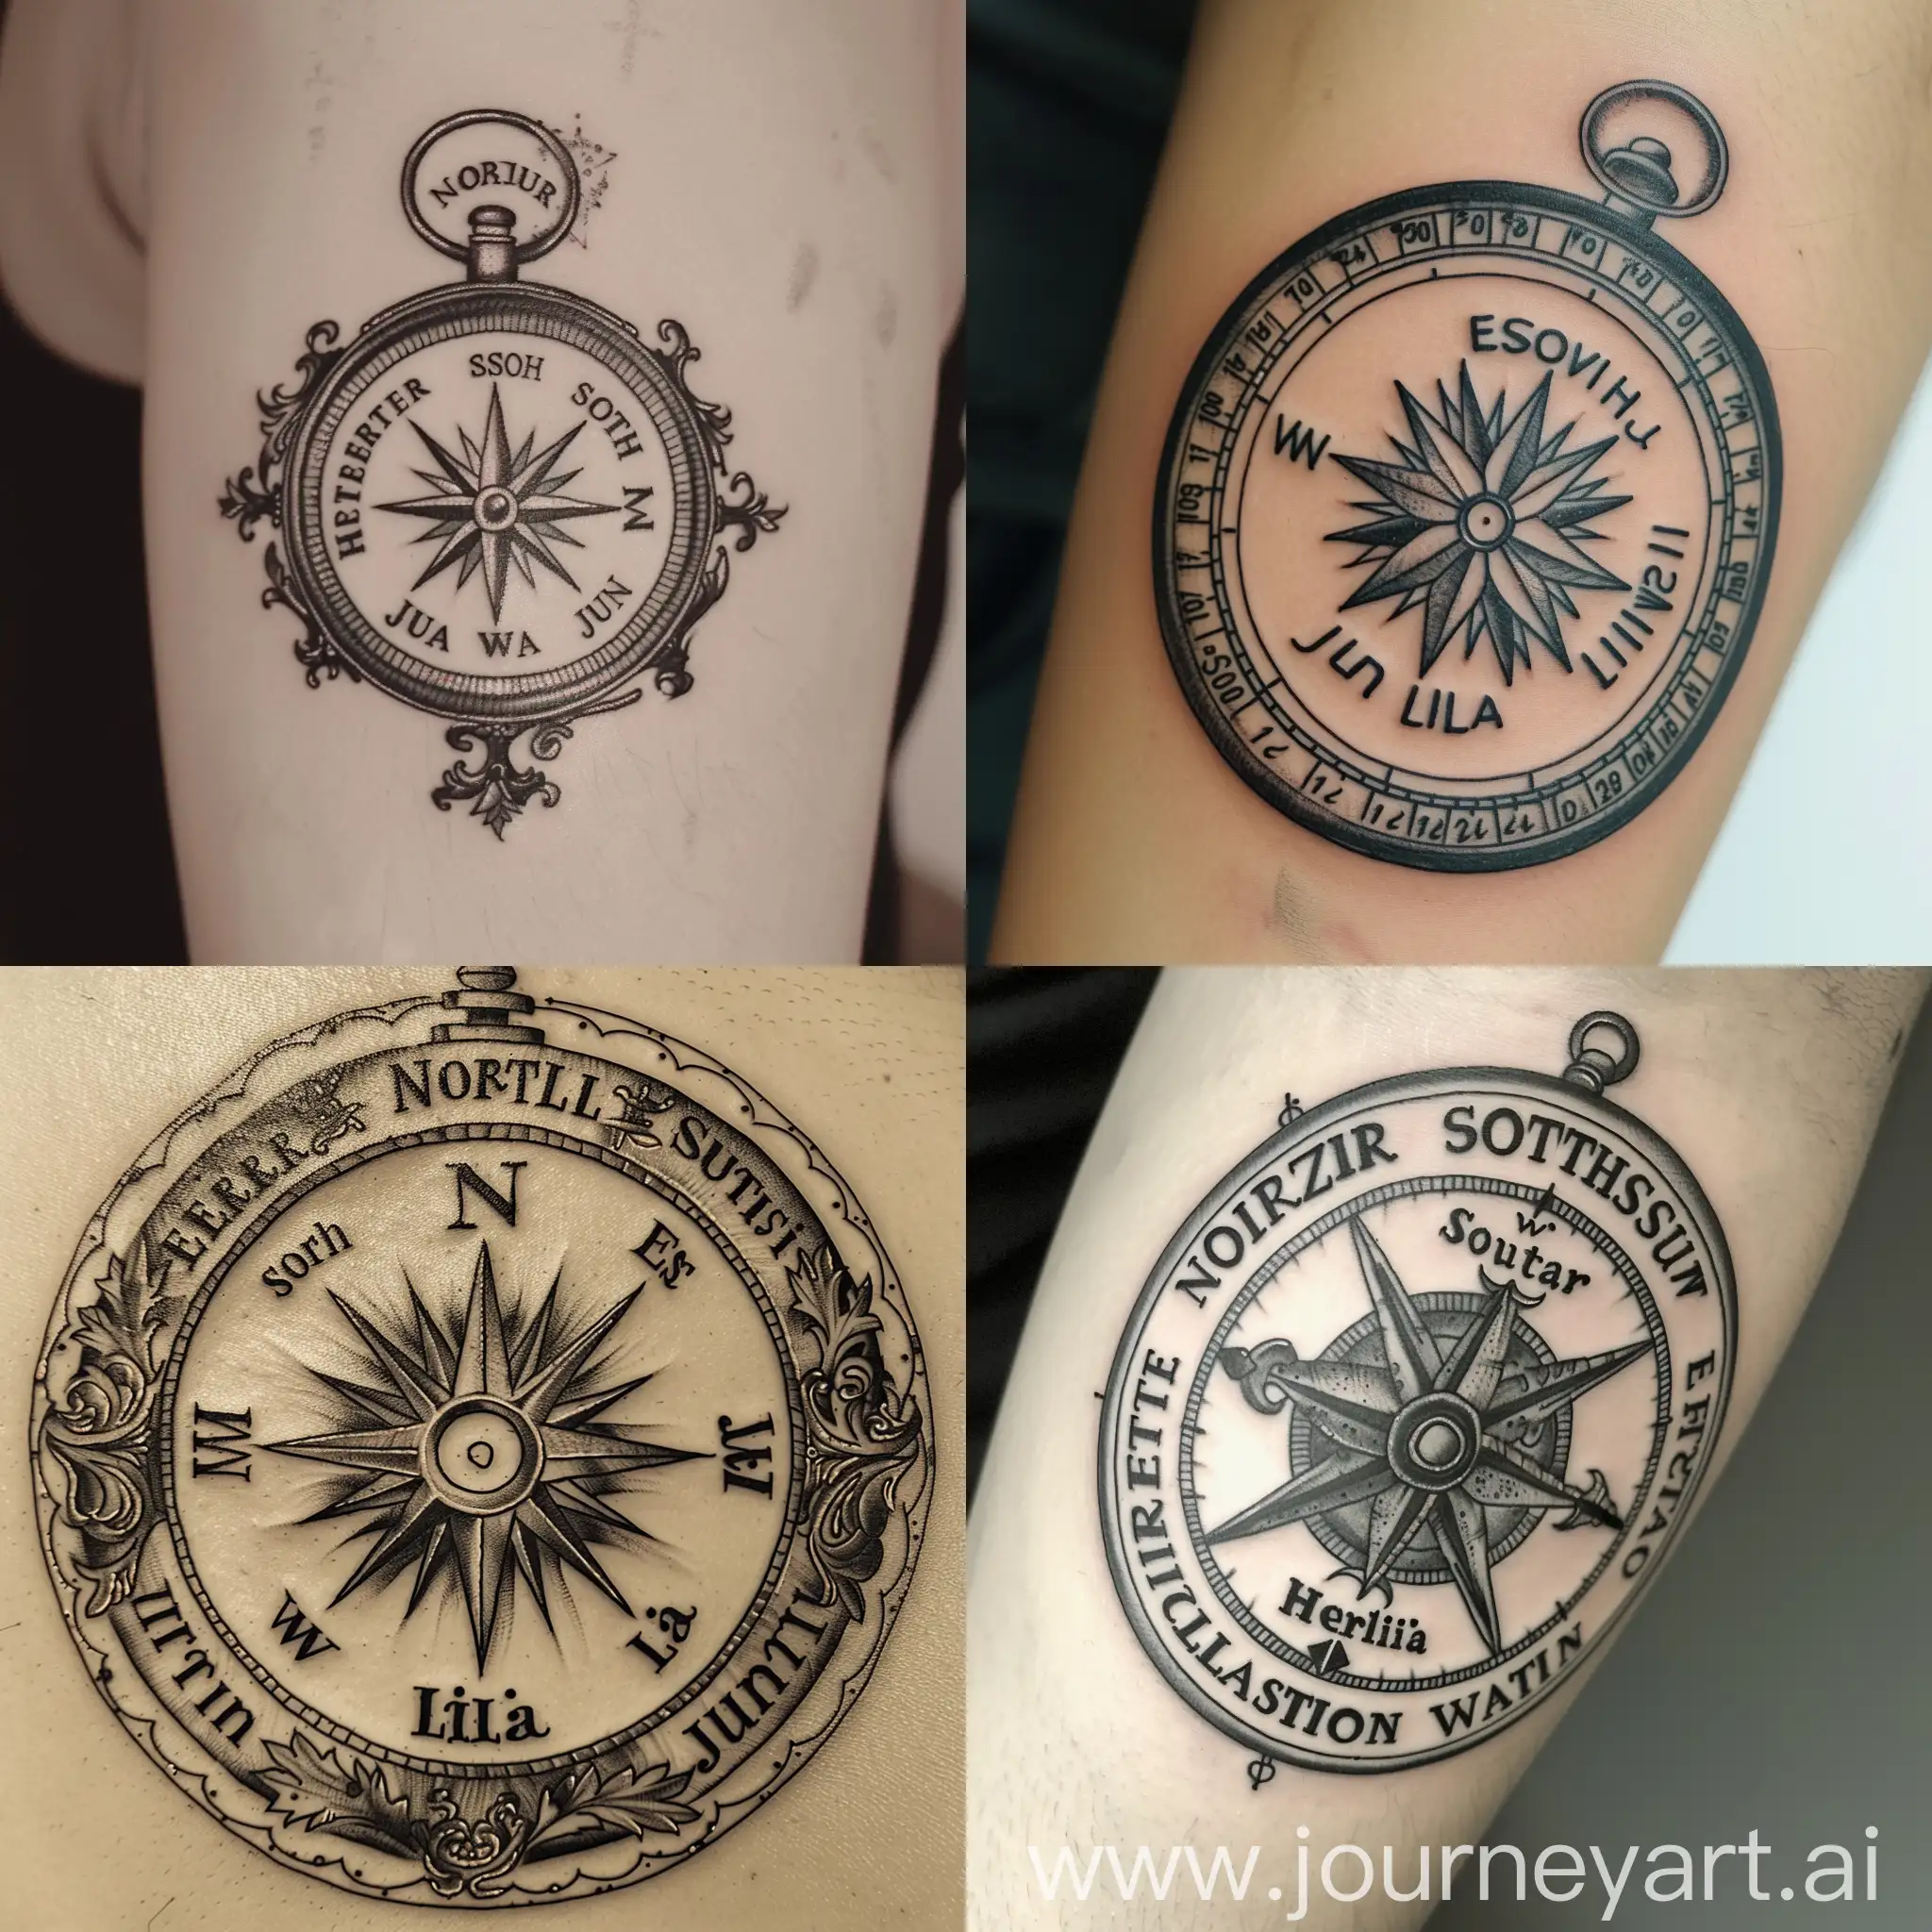 "Design a 10-centimeter diameter tattoo of a compass in black and grey ink. Instead of the cardinal directions (north, south, east, west), incorporate the names Esther, Hercilia, Juan, and Lila. Be creative with the placement and design of the names within the compass."